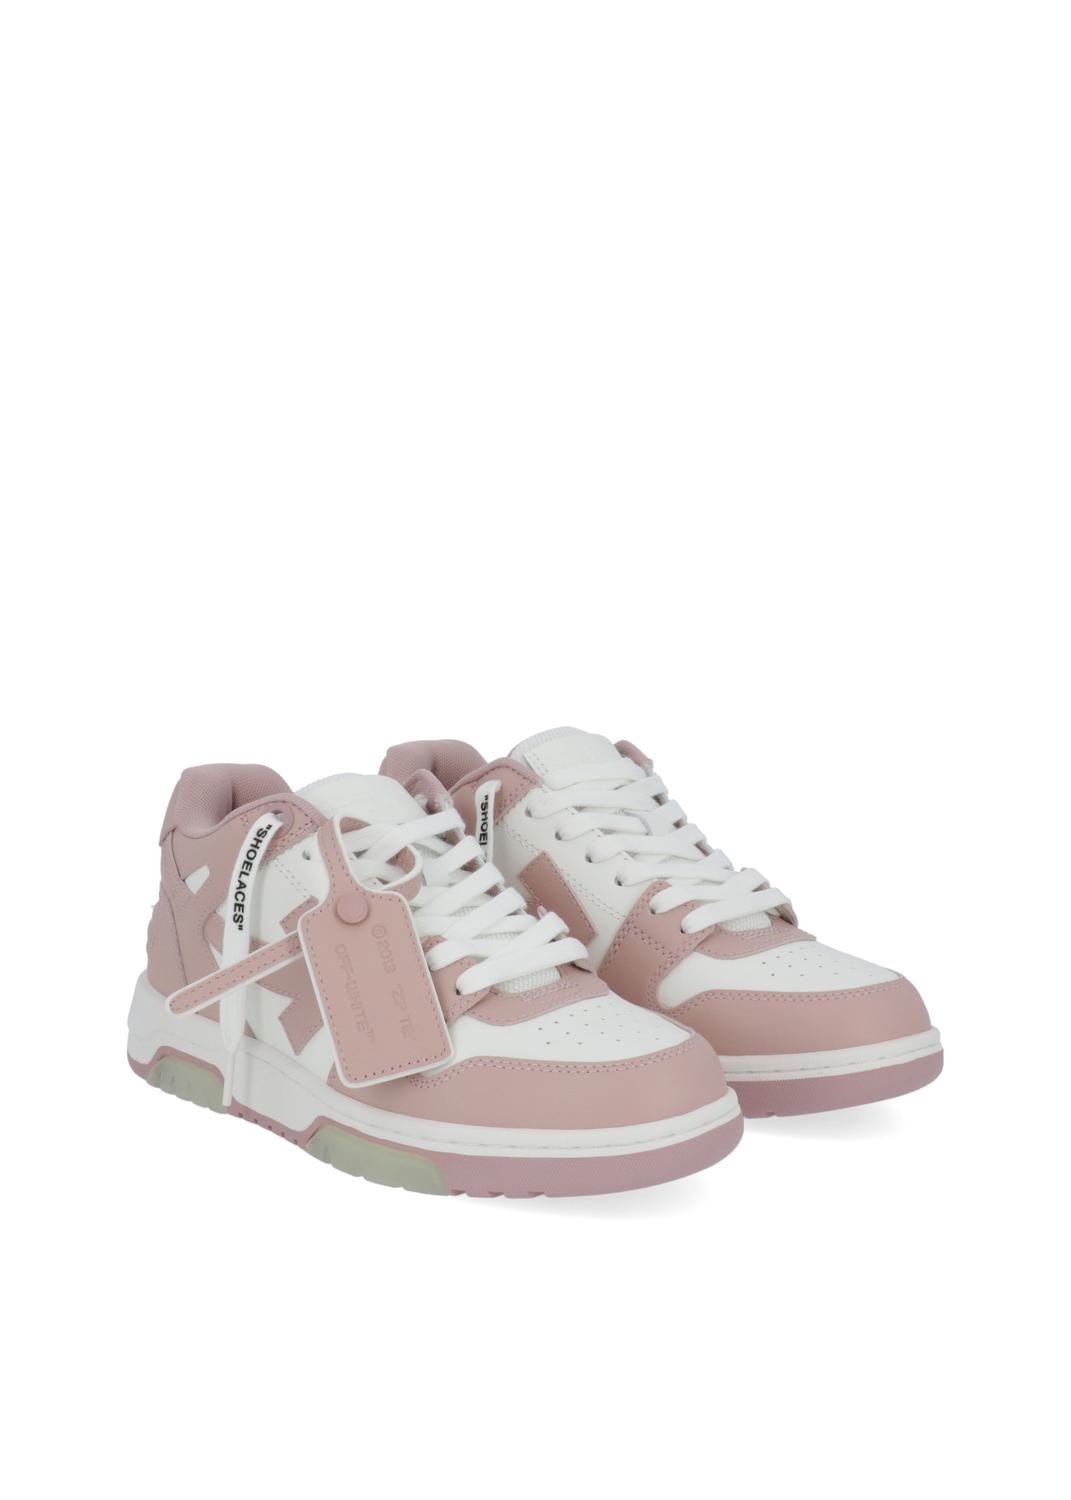 Off-White tenis 'Out Of Office' FFW-OWIA259C